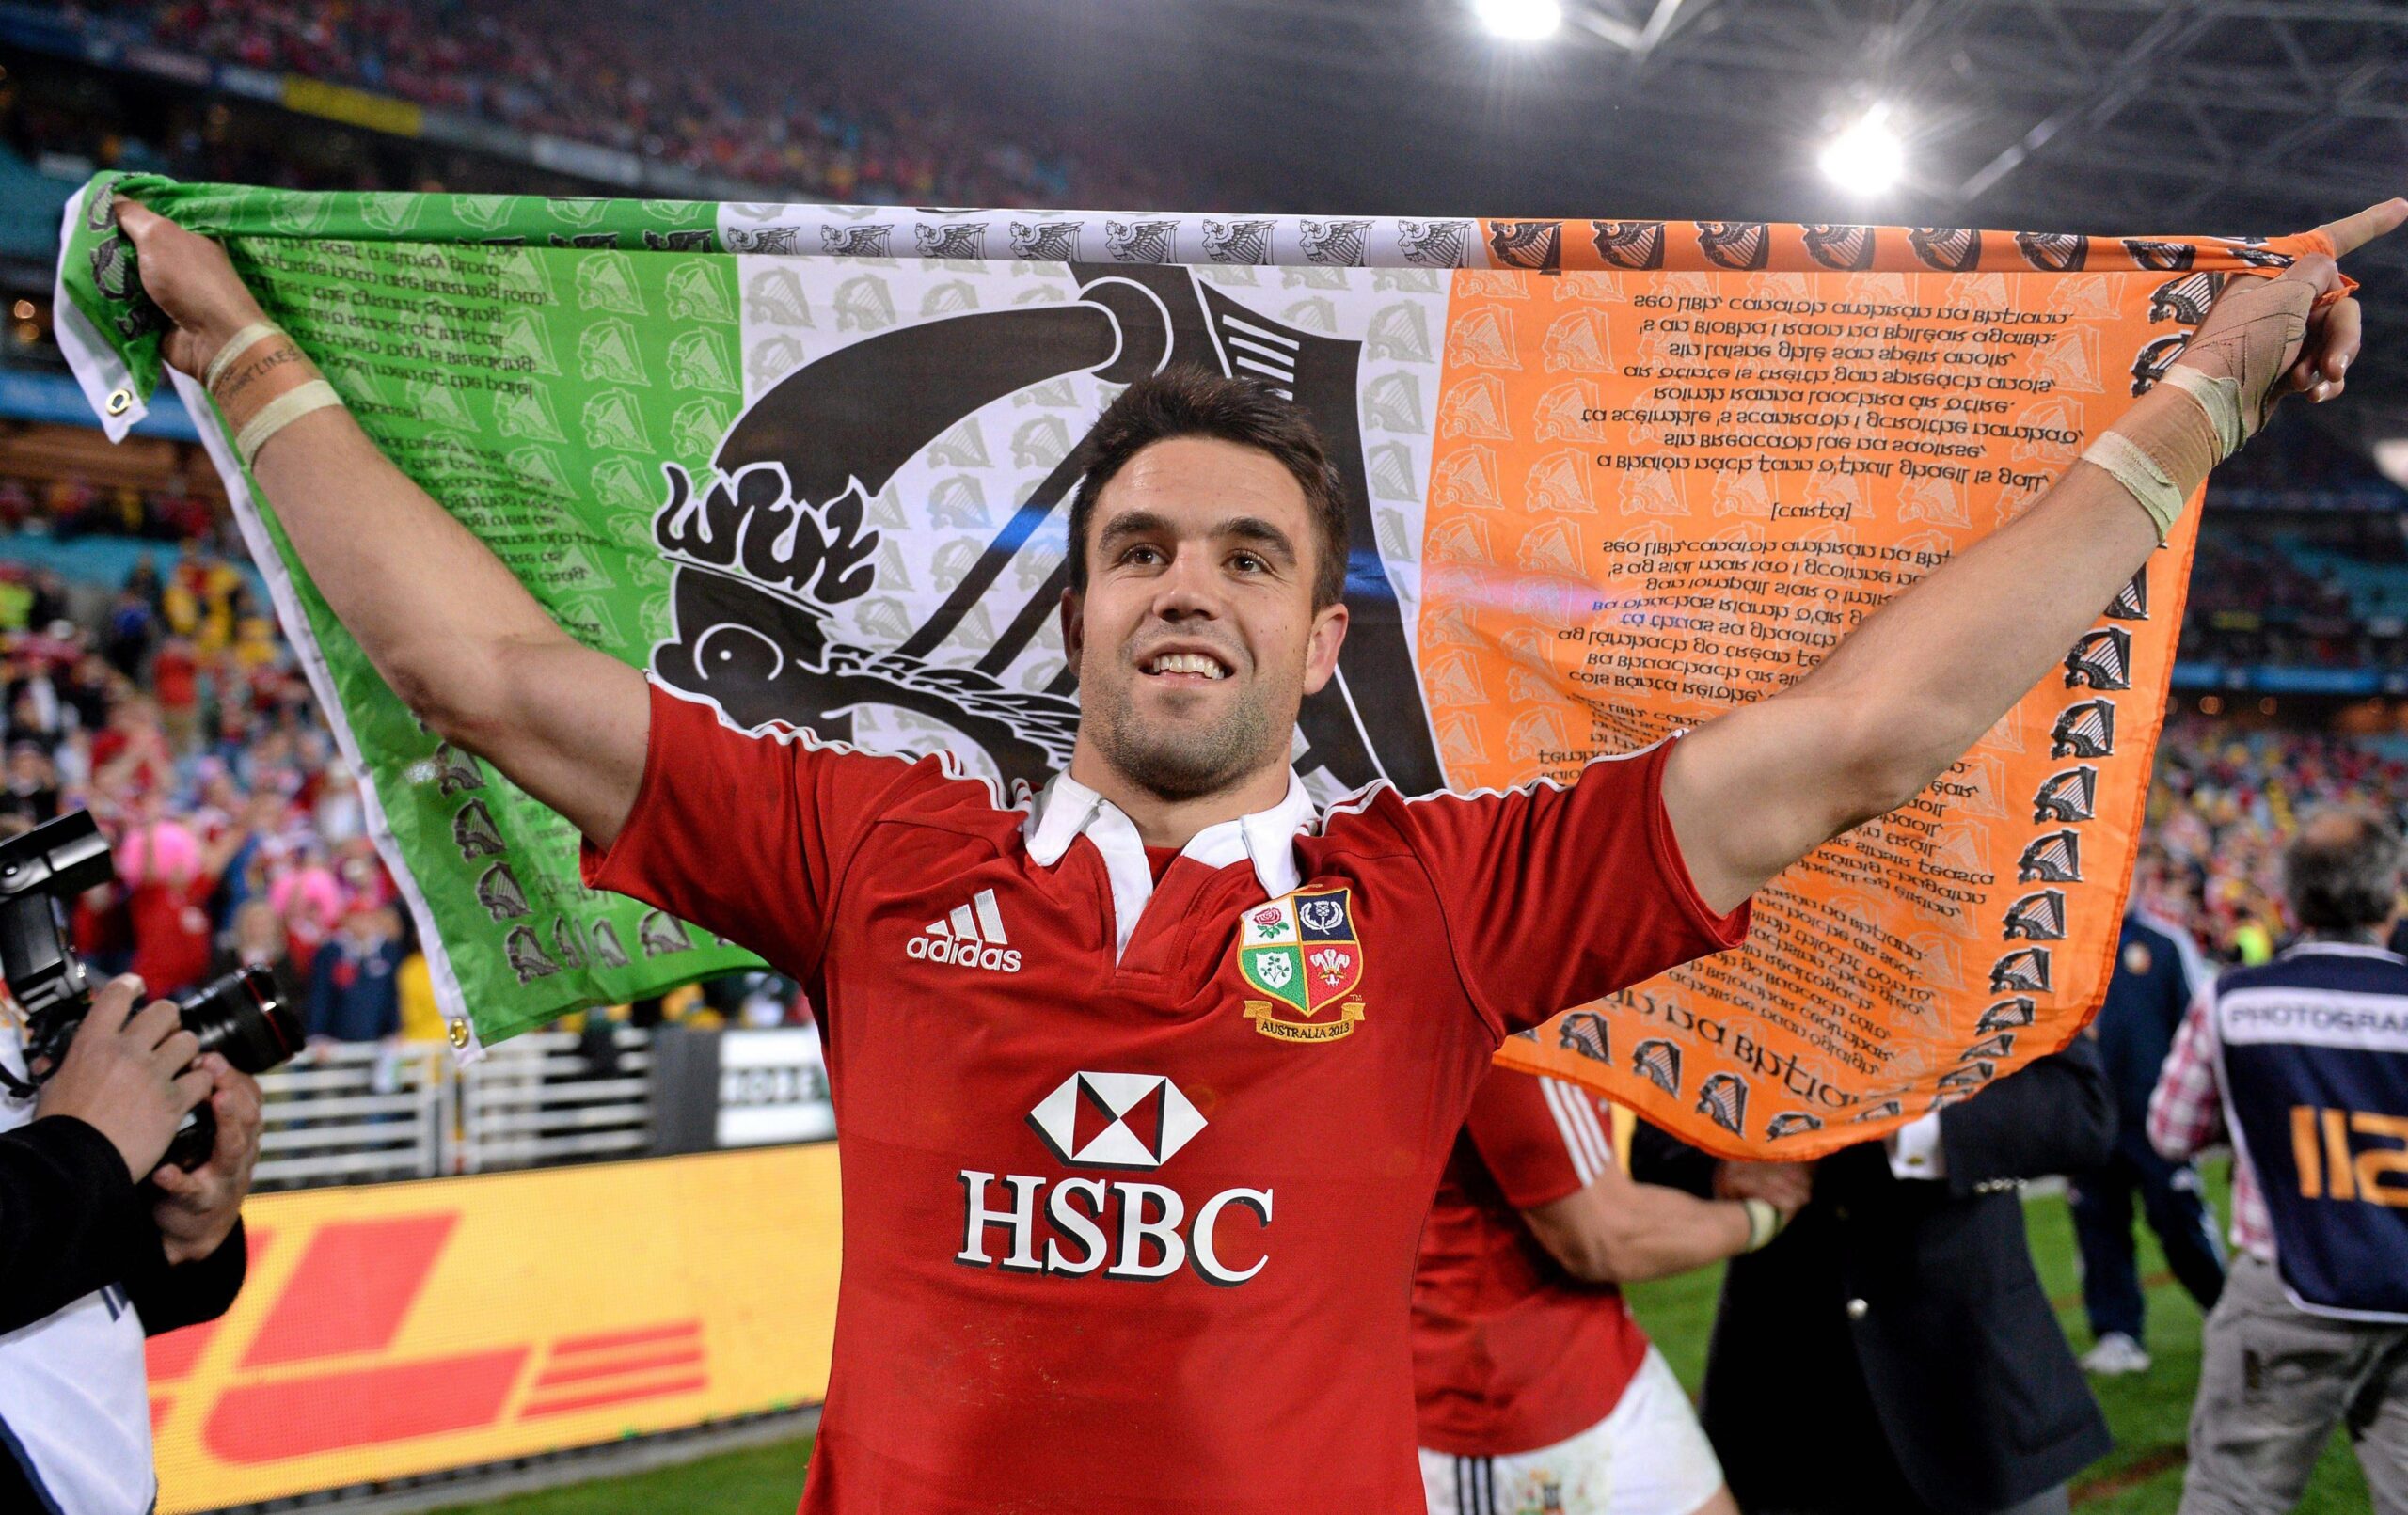  Conor Murray celebrates after the Lions' series win over Australia